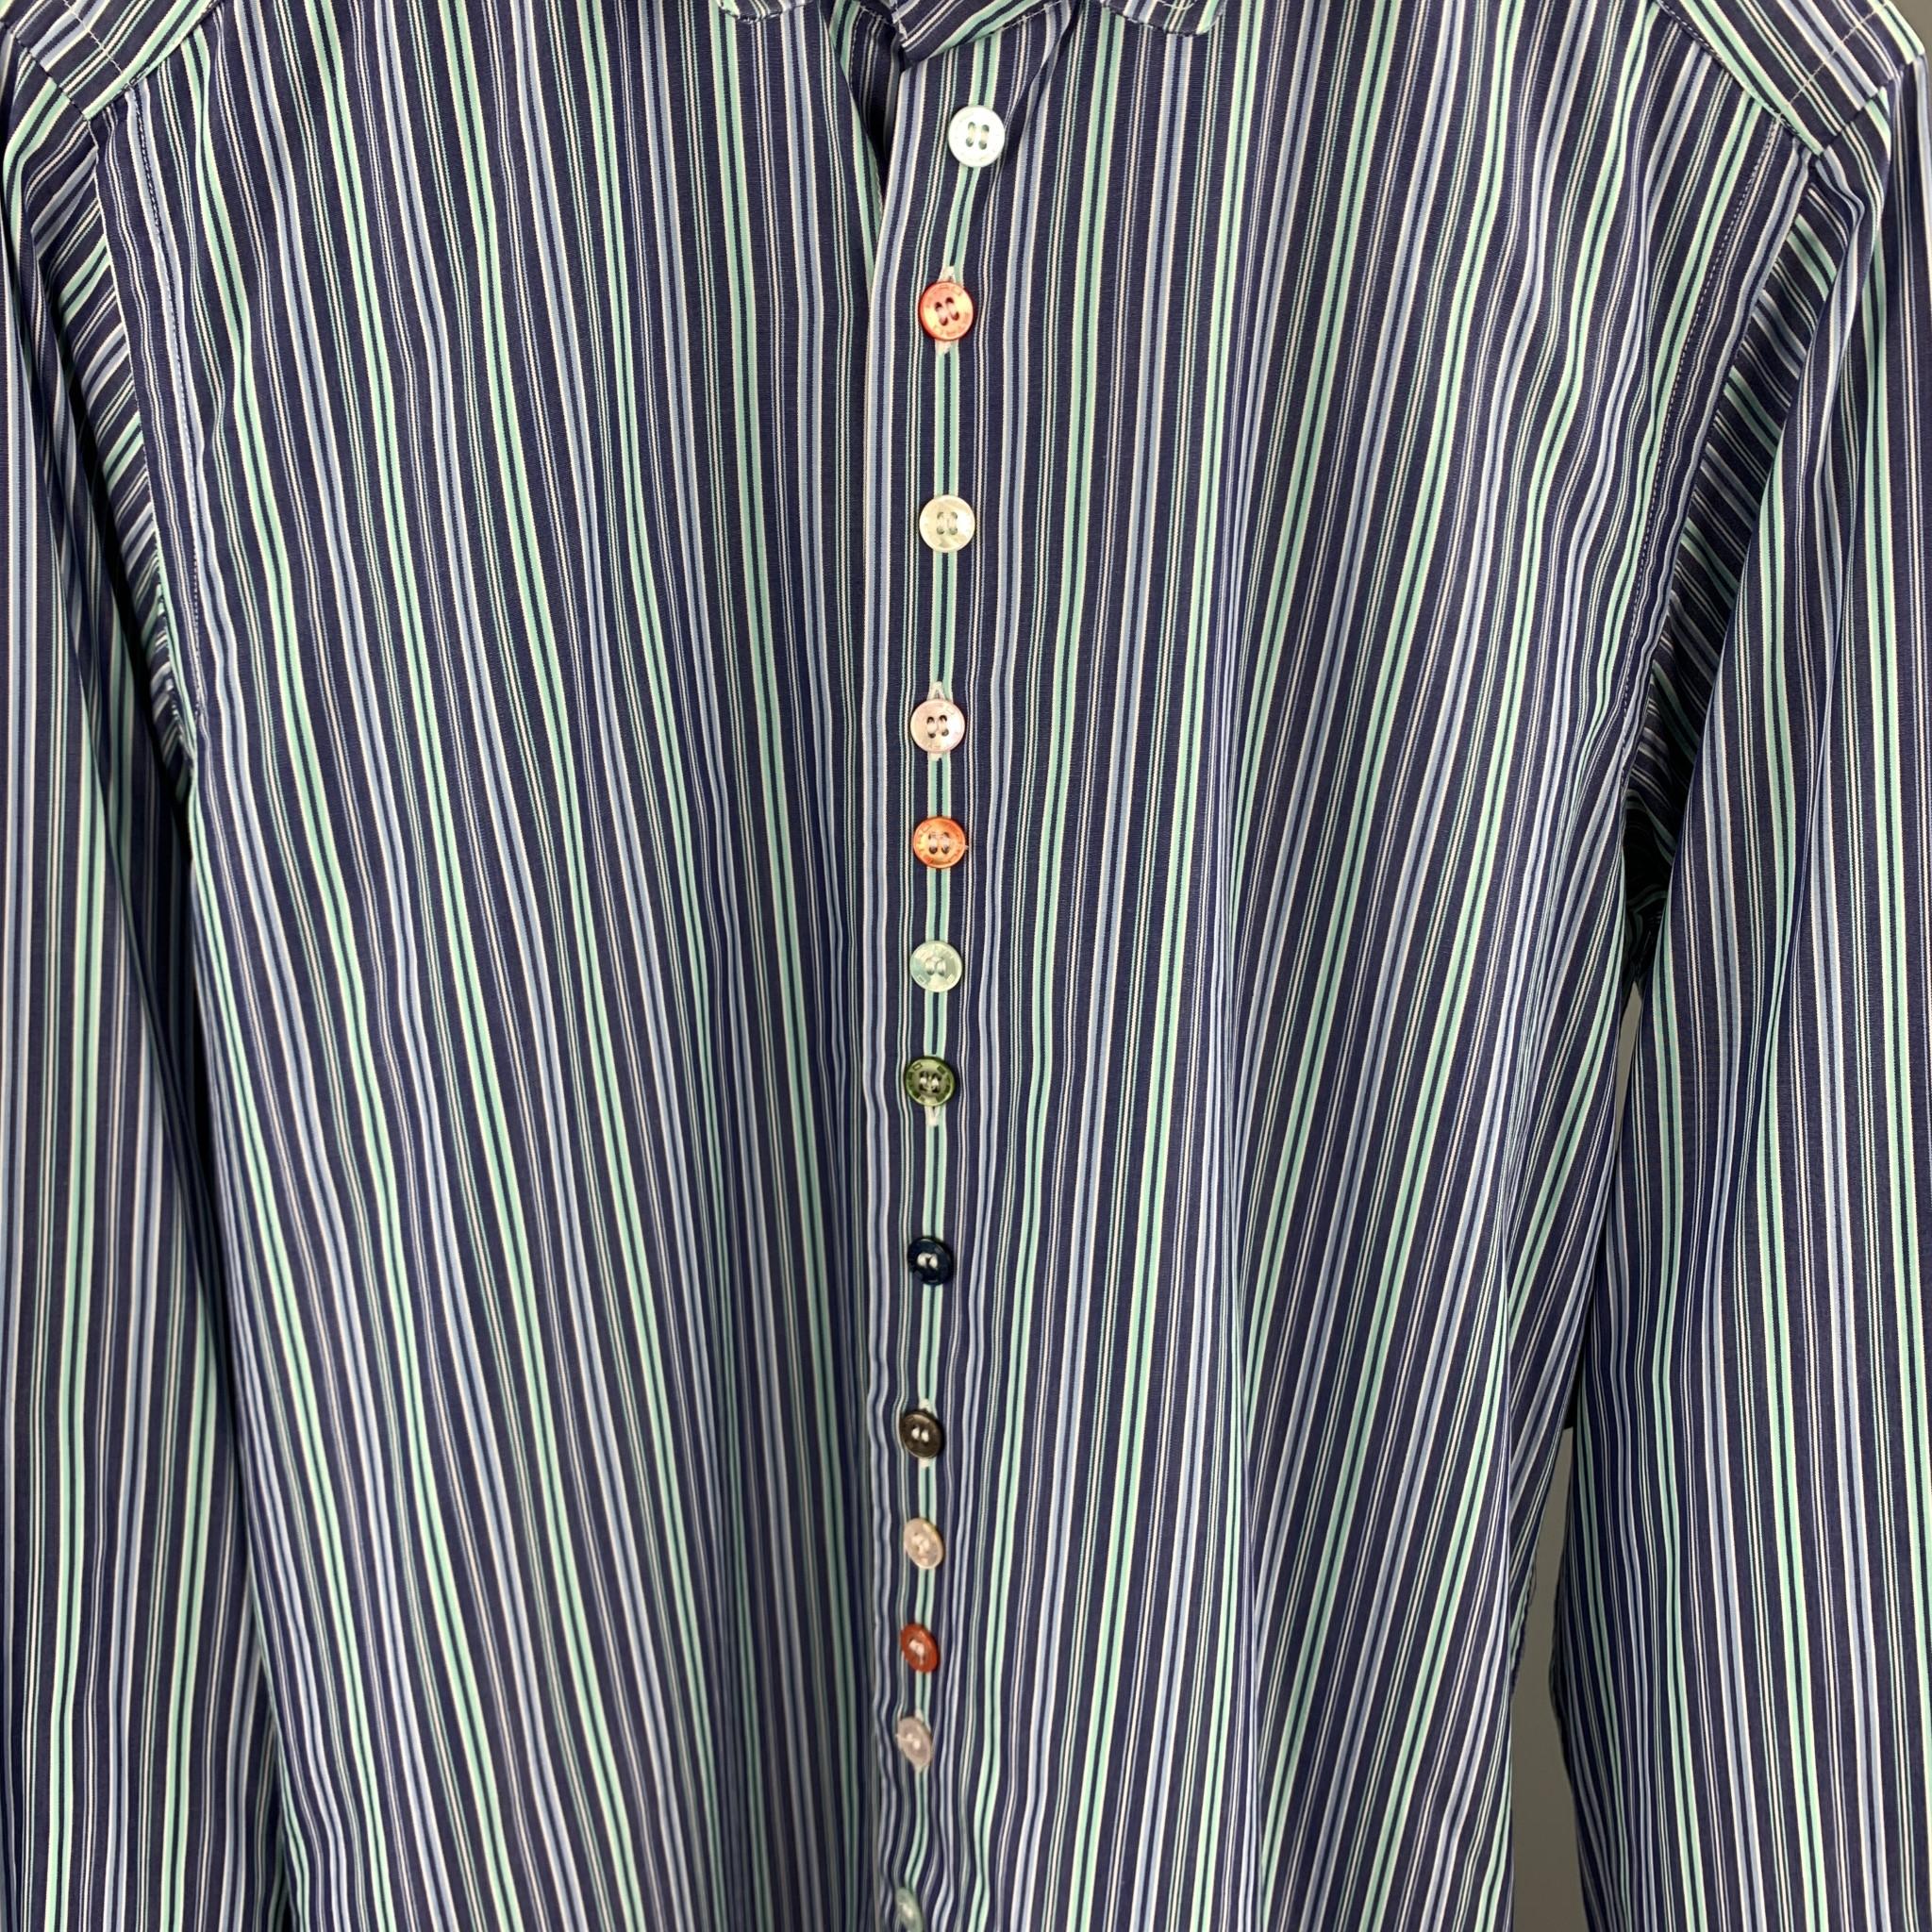 ETRO long sleeve shirt comes in a blue & green stripe cotton featuring a button up style, multi-color buttons, and a spread collar. Made in Italy.

Excellent Pre-Owned Condition.
Marked: 38

Measurements:

Shoulder: 15 in. 
Chest: 38 in. 
Sleeve: